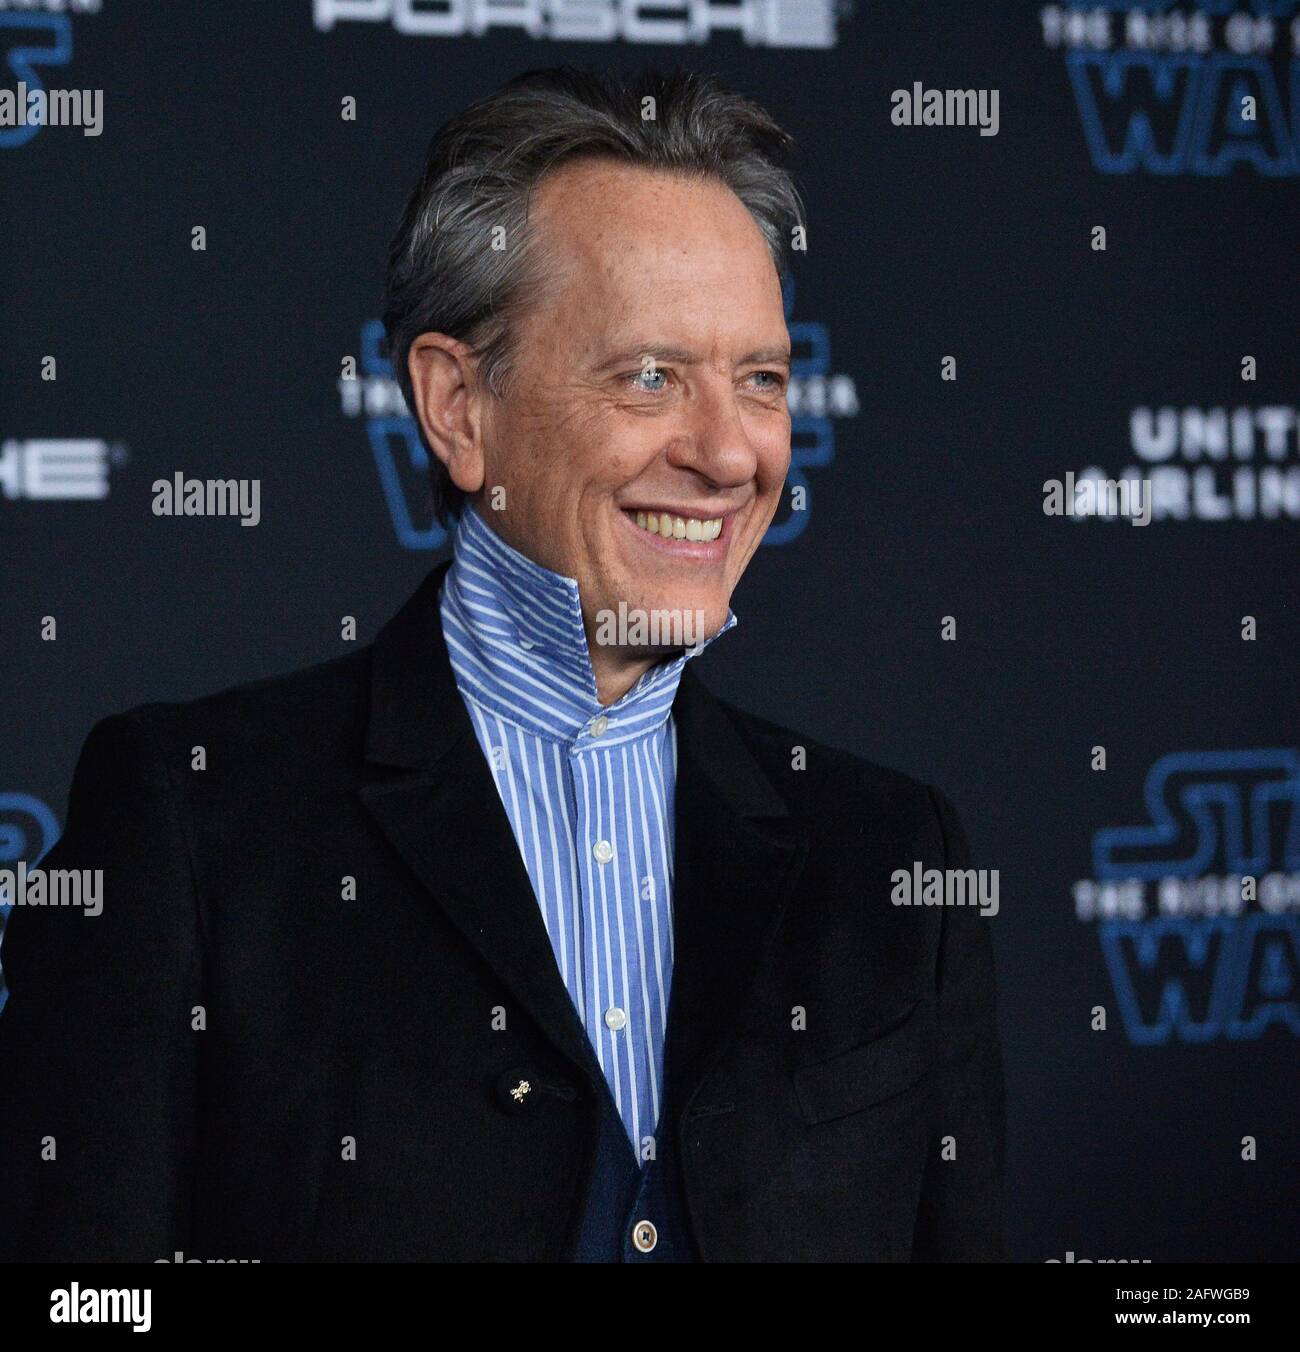 Los Angeles, United States. 17th Dec, 2019. Cast member Richard E. Grant attends the premiere the motion picture sci-fi fantasy 'Star Wars: The Rise of Skywalker' at the TCL Chinese Theatre in the Hollywood section of Los Angeles on Monday, December 16, 2019. Storyline: The surviving Resistance faces the First Order once more in the final chapter of the Skywalker saga. Photo by Jim Ruymen/UPI Credit: UPI/Alamy Live News Stock Photo